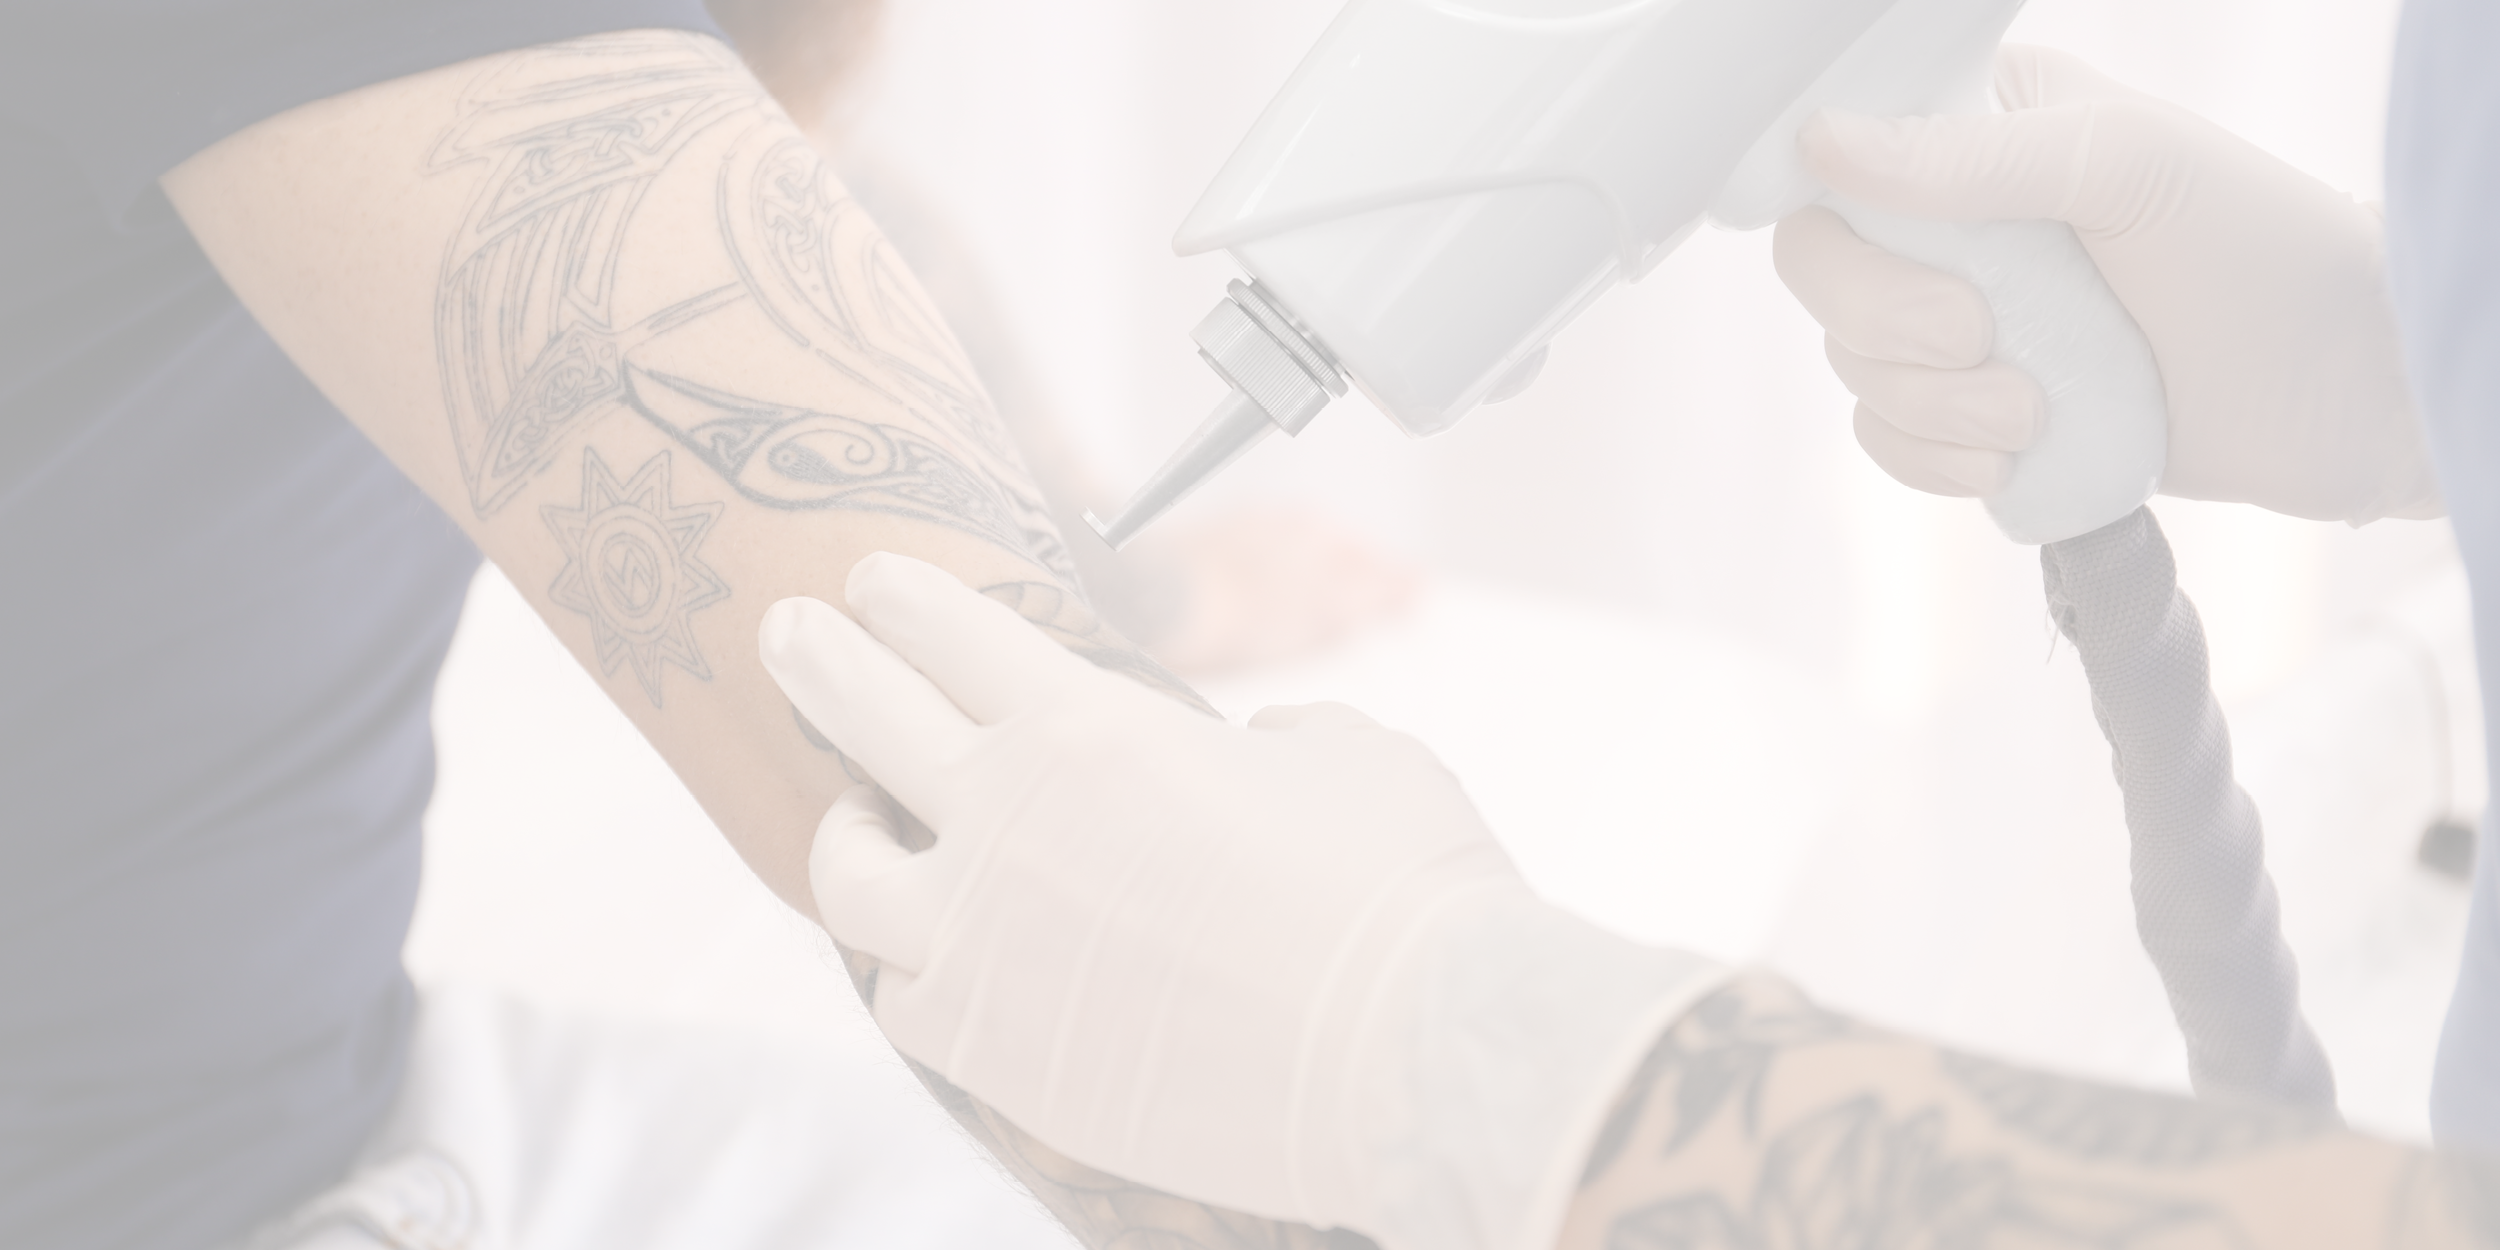 Laser Tattoo Removal and Laser Hair Removal Learning Center